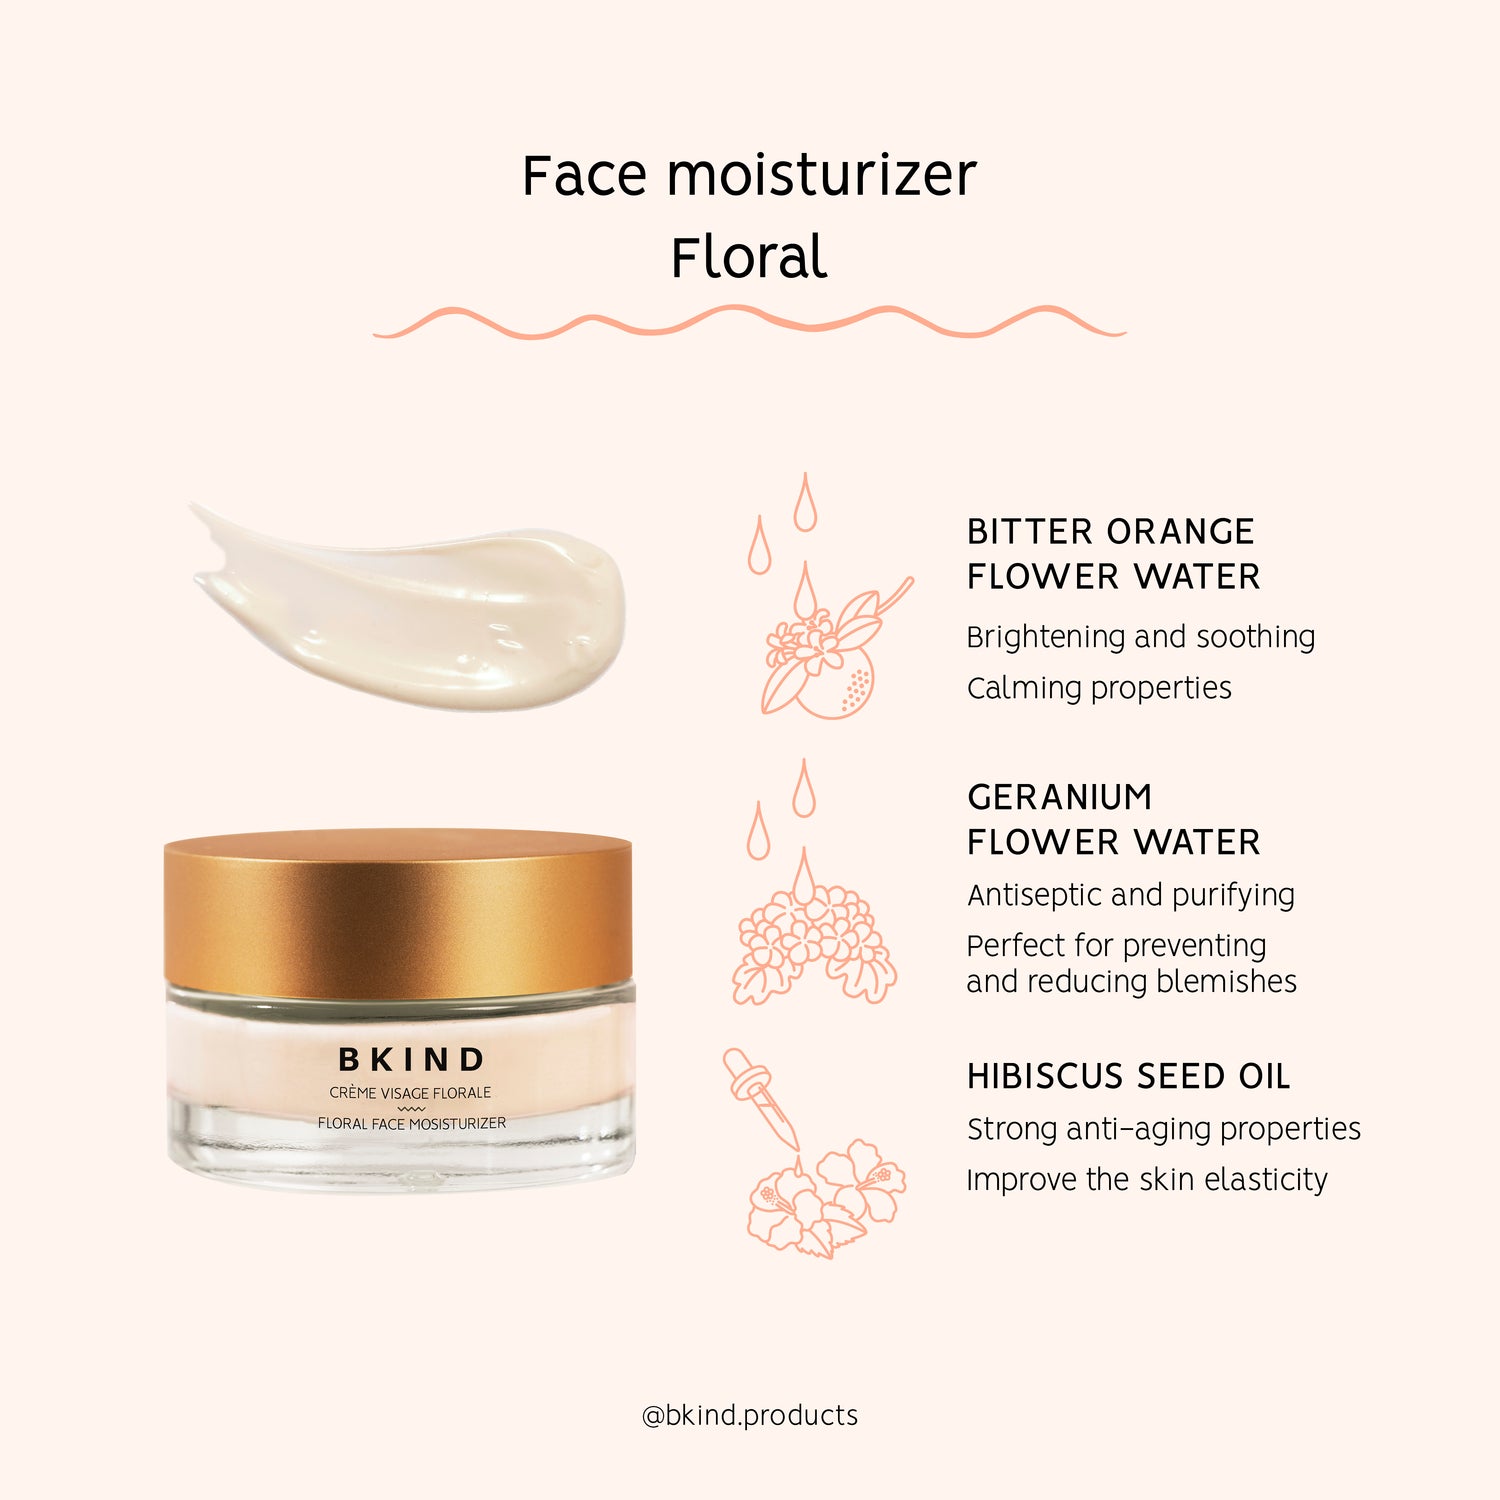 Floral face moisturizer with Hyaluronic Acid